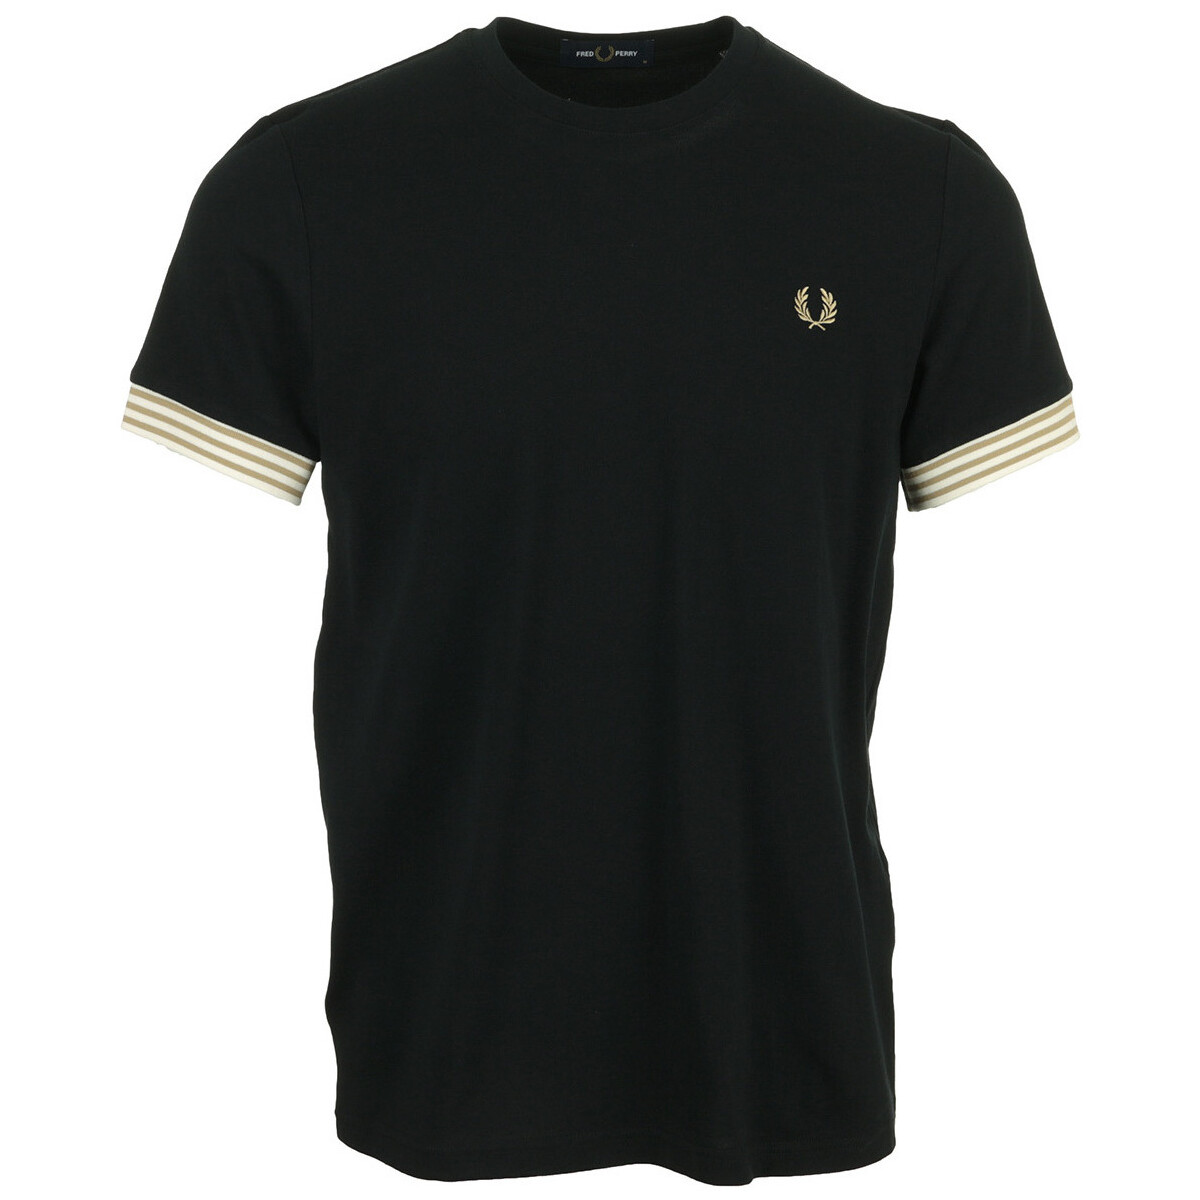 Vêtements Homme T-shirts manches courtes Fred Perry Stripped Cuff Noir